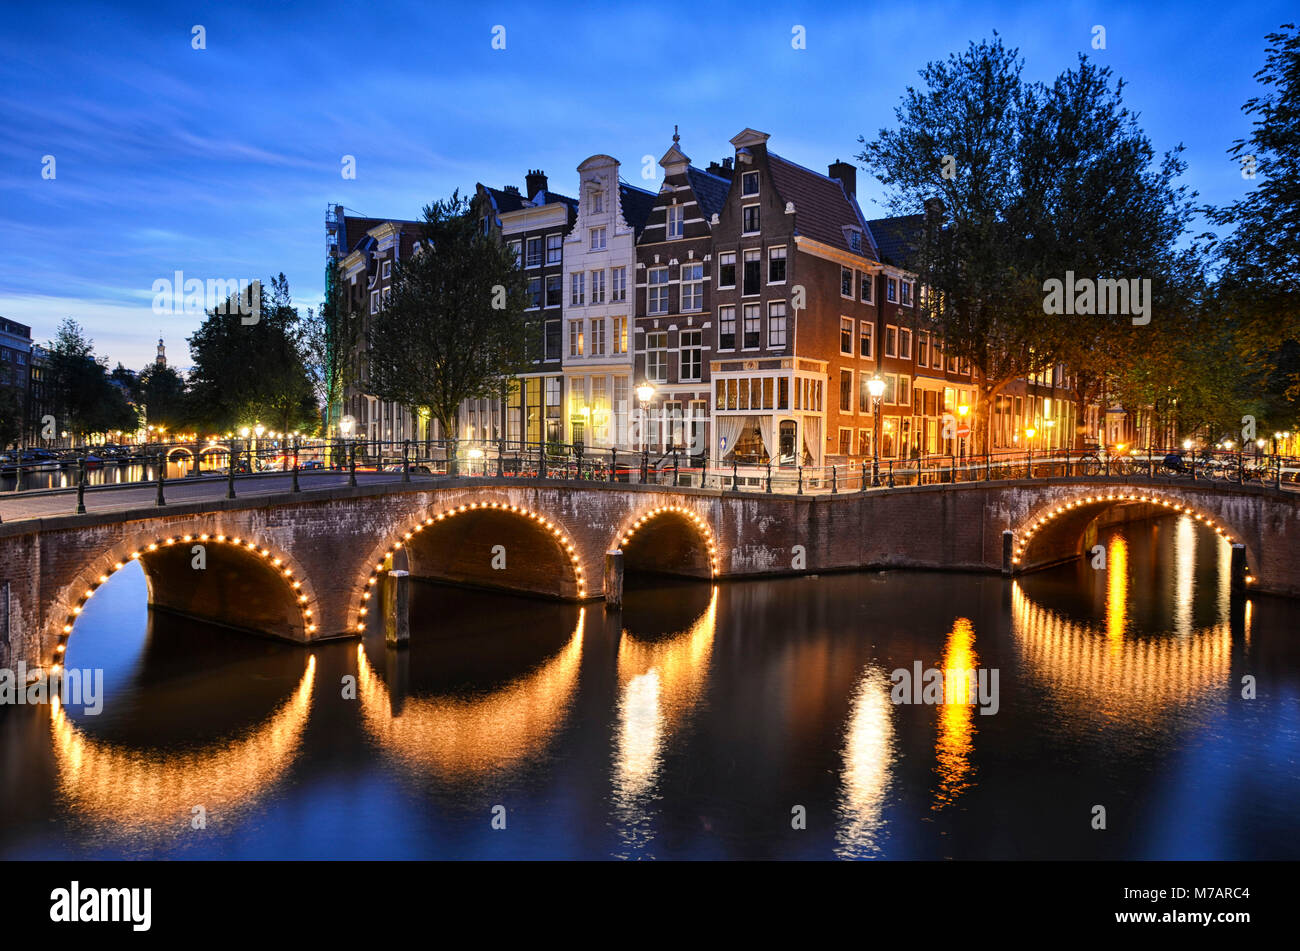 Night scene at a canal with traditional buildings and an arch bridge in Amsterdam, Netherlands Stock Photo